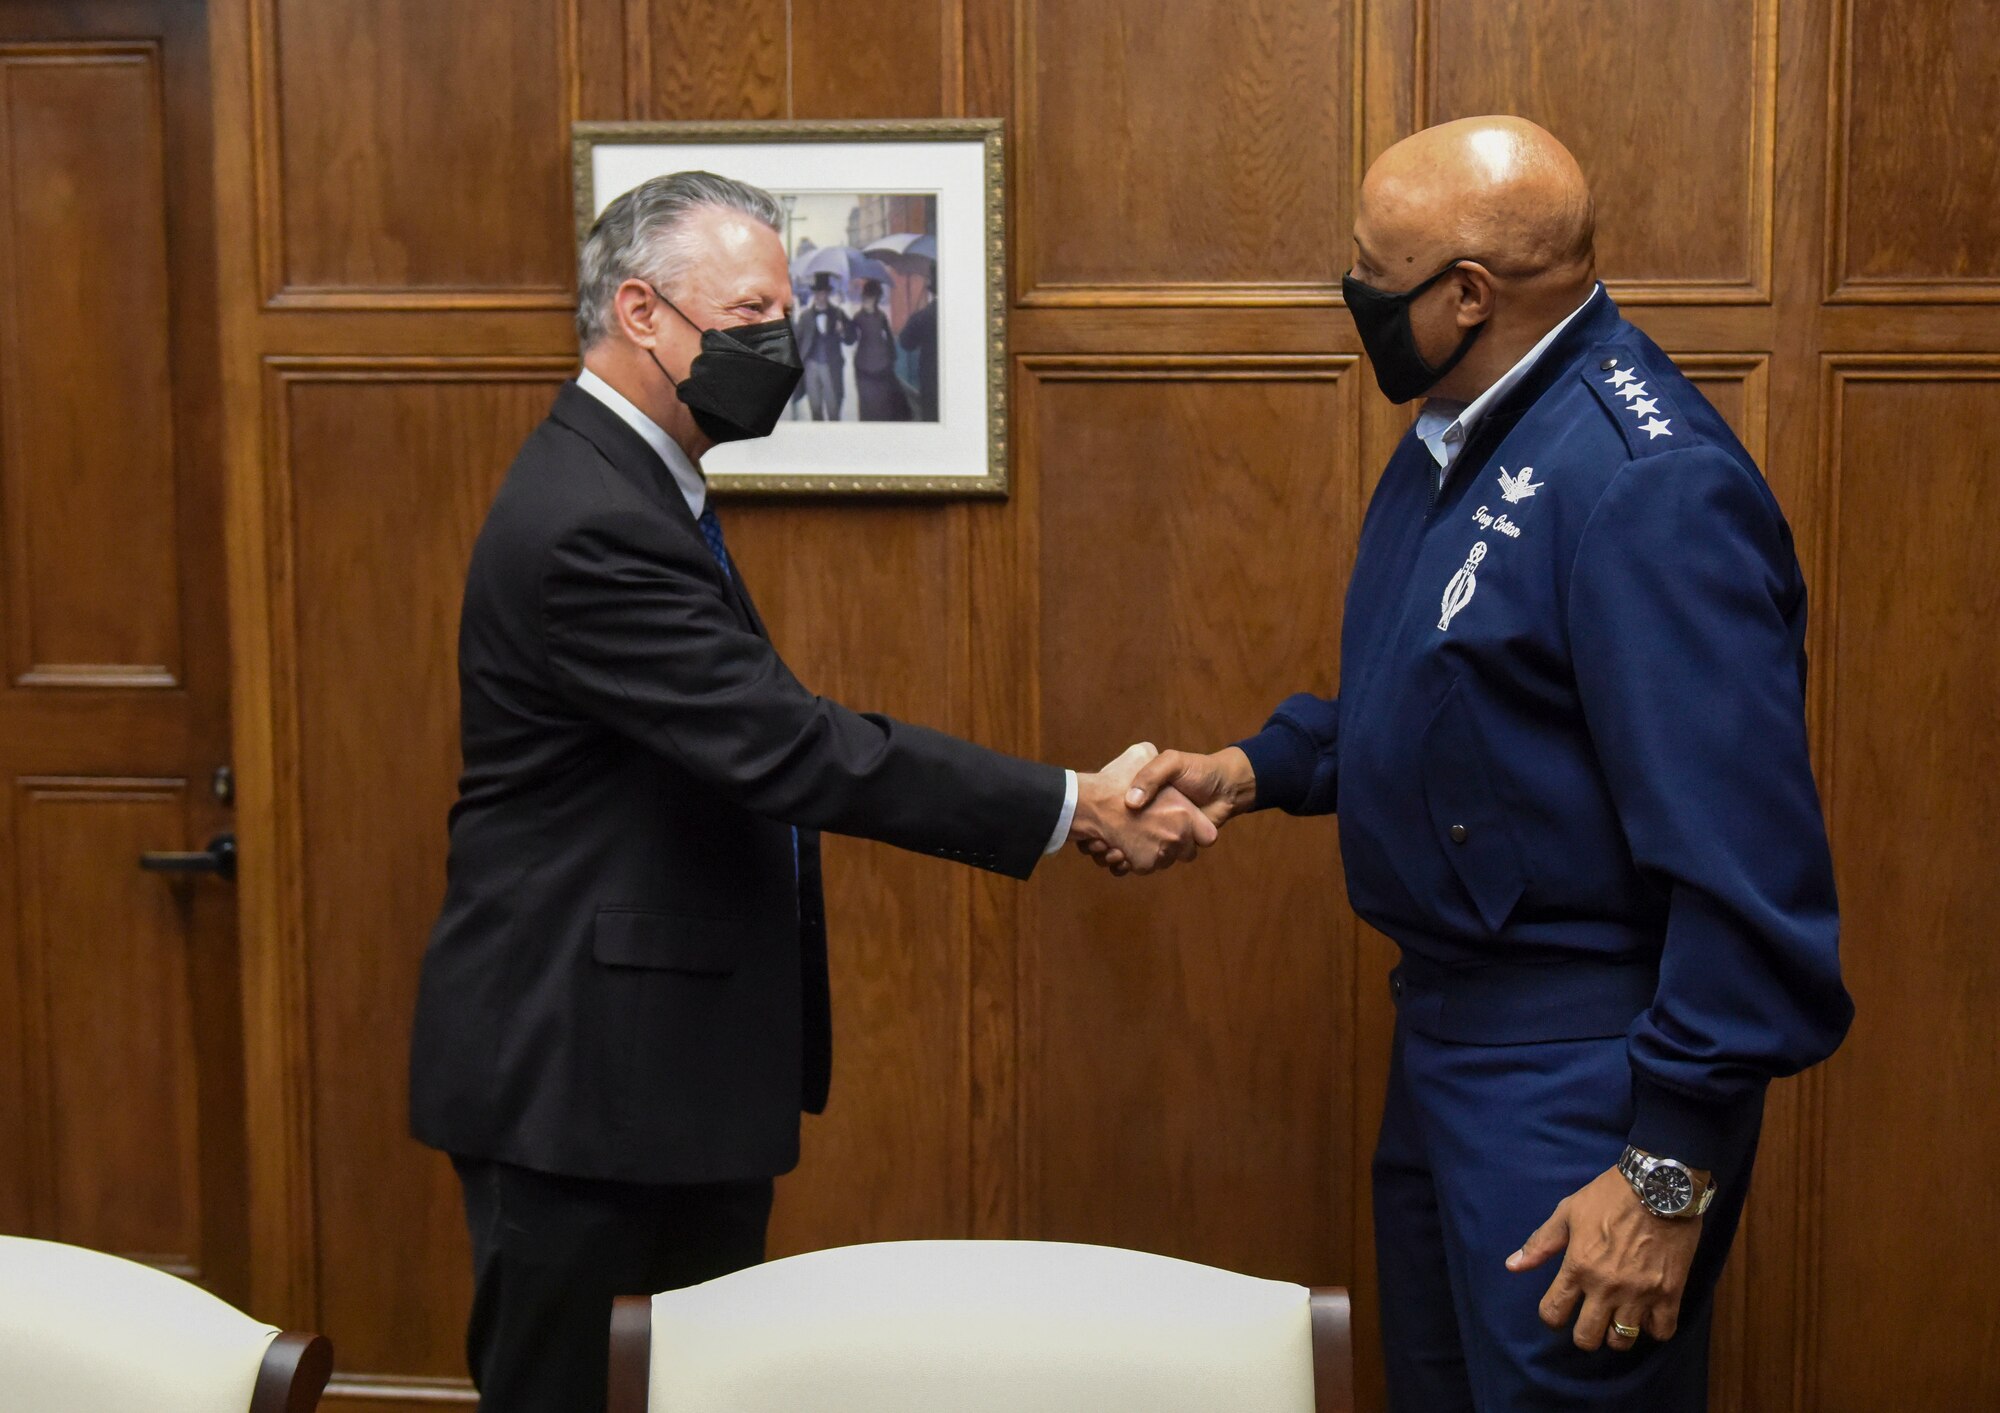 Gen. Anthony Cotton, Commander, Air Force Global Strike Command and Commander, Air Forces Strategic-Air, meets with Dr. Sam Huckaba, Dean of the College of Humanities and Social Sciences. Huckaba administratively oversees the detachment and its cadets progress within the Florida State University system. (U.S. Air Force photo by 1st Lt. Kaylin P. Hankerson)